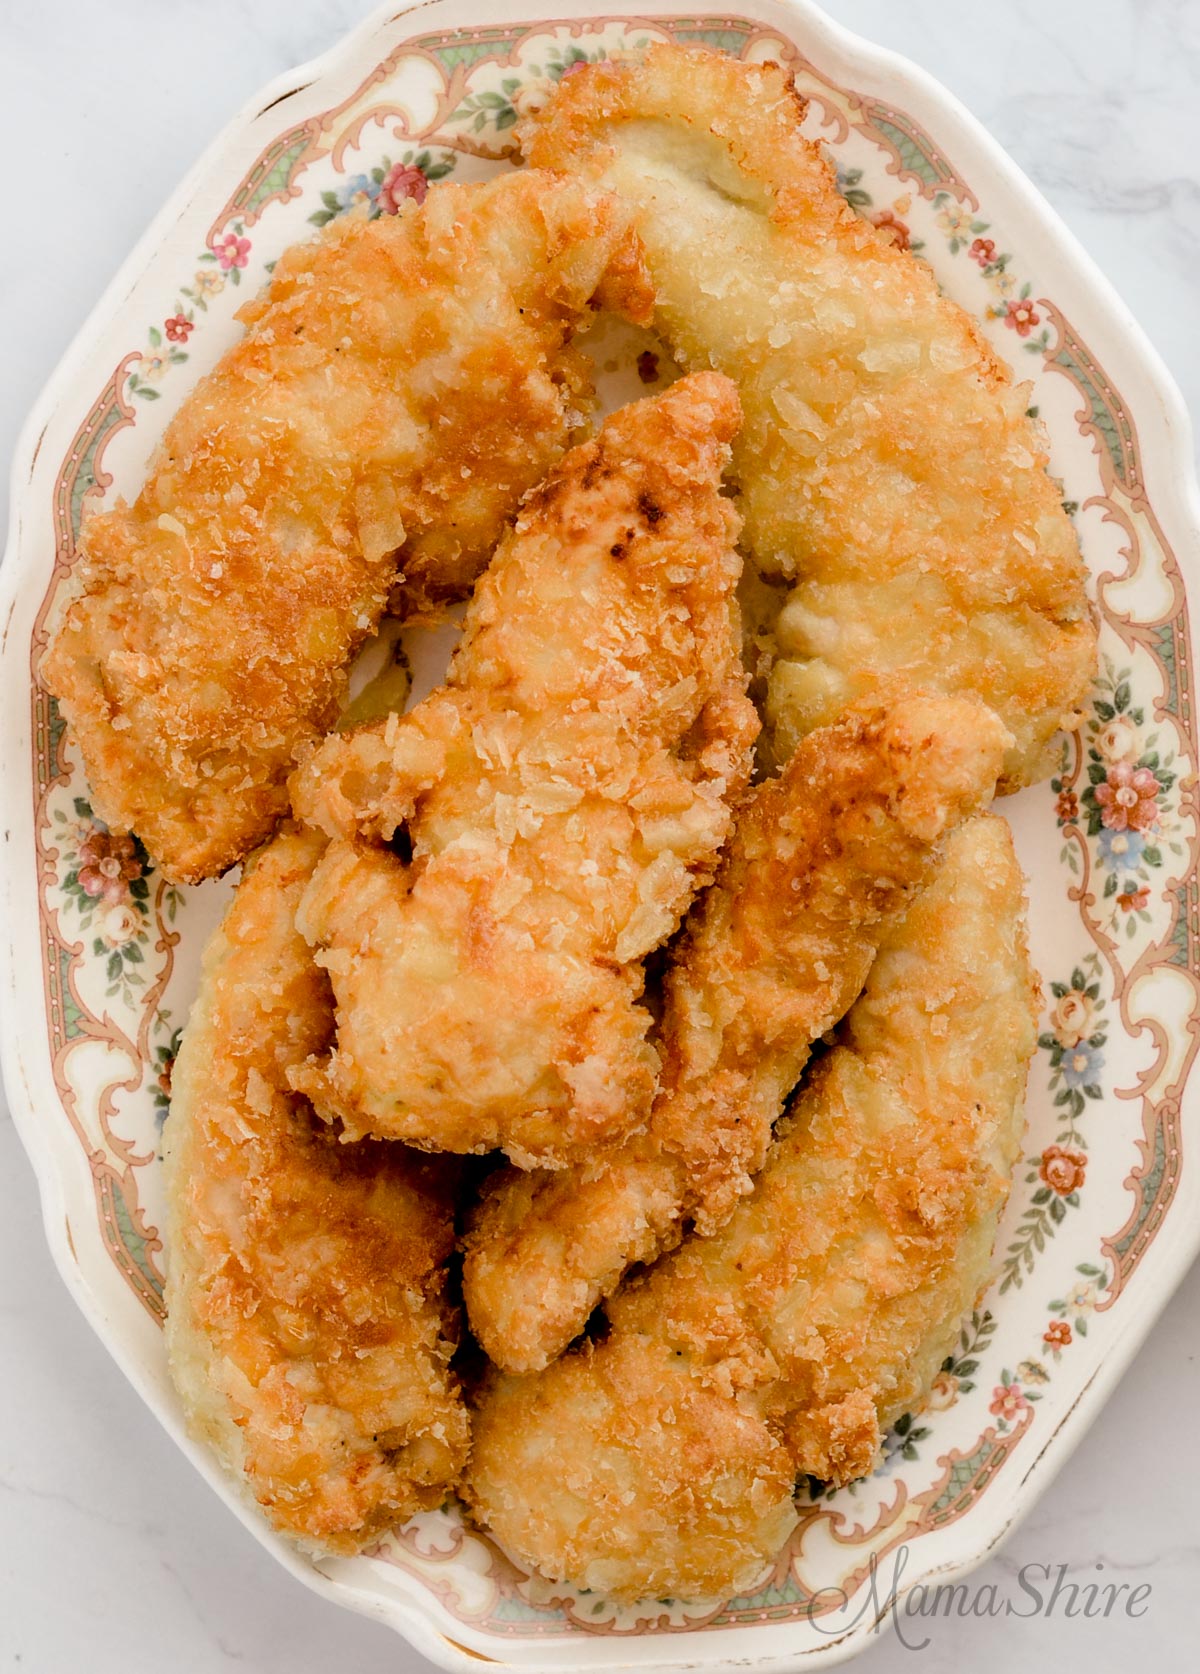 A plate of fried chicken made with a potato chip breading.